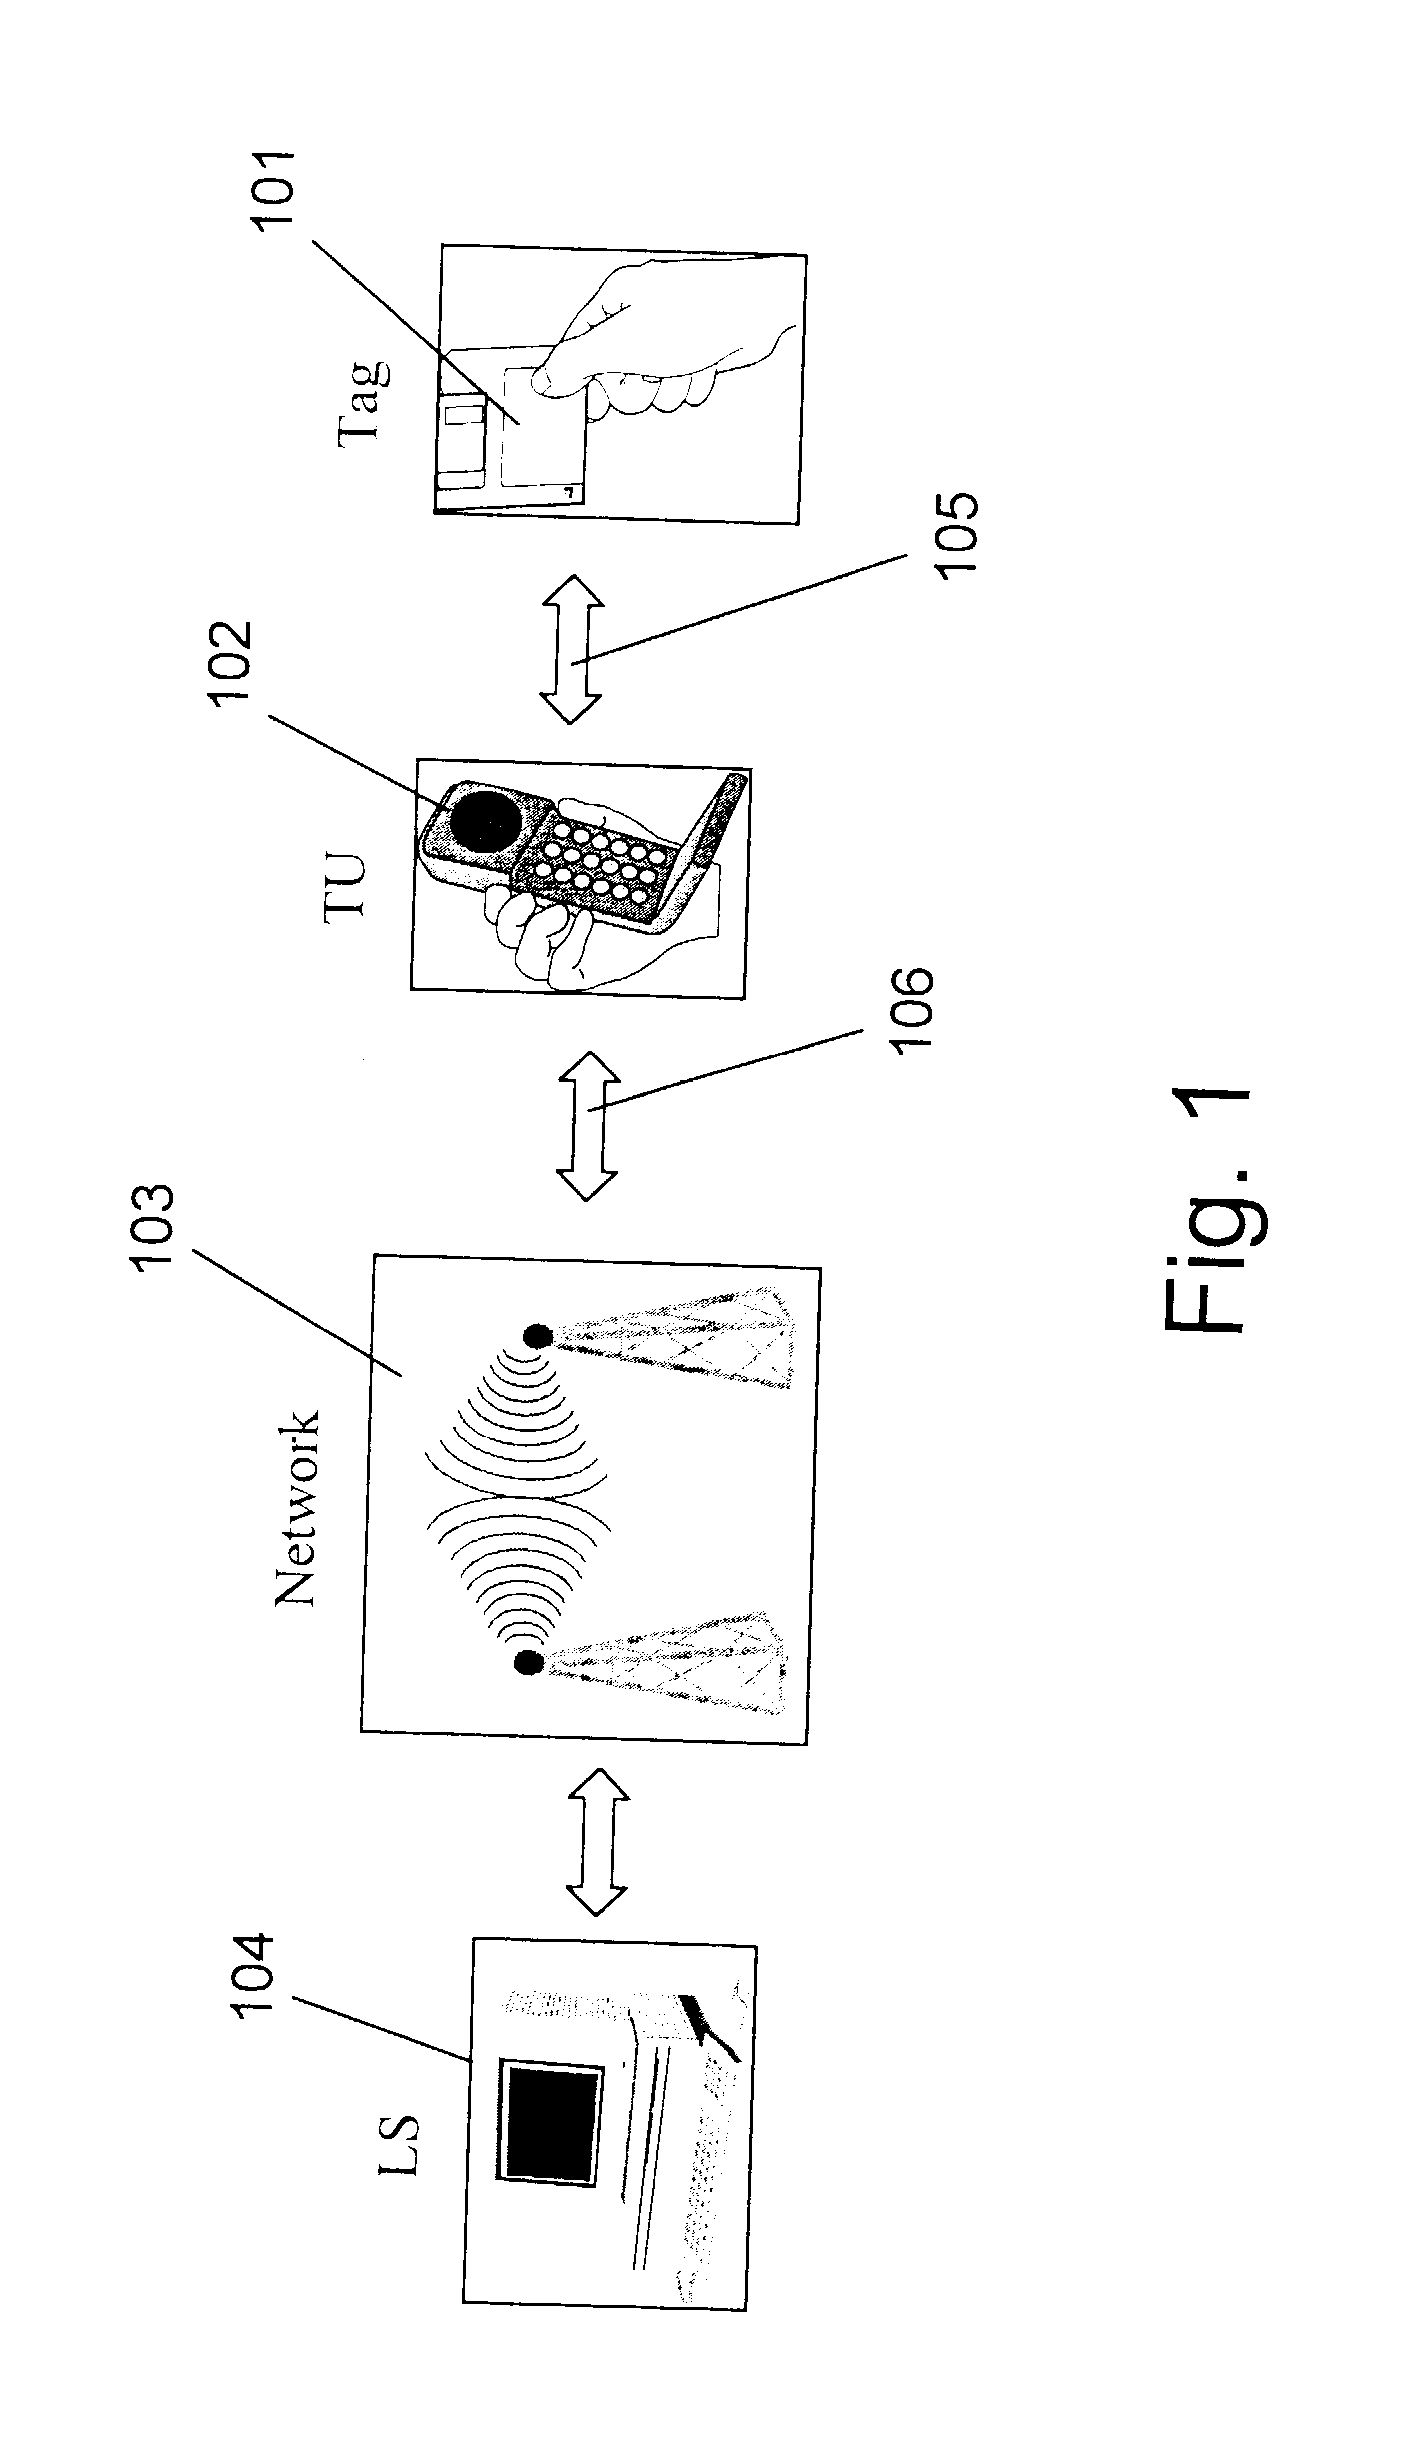 A wireless location determining device